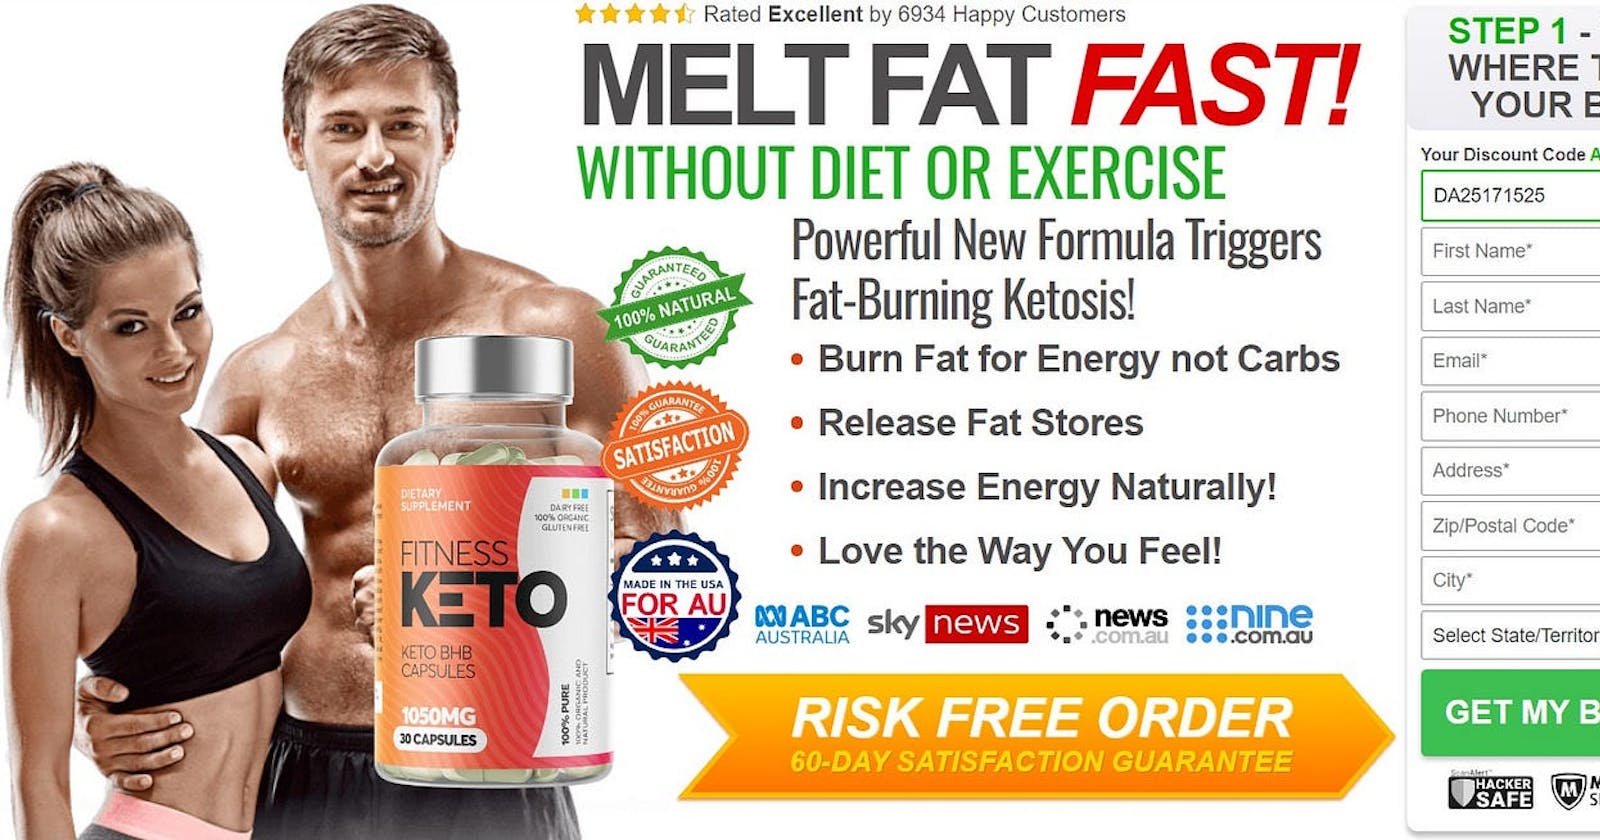 Fitness Keto Capsules Australia: Ingredients, Benefits, and Results